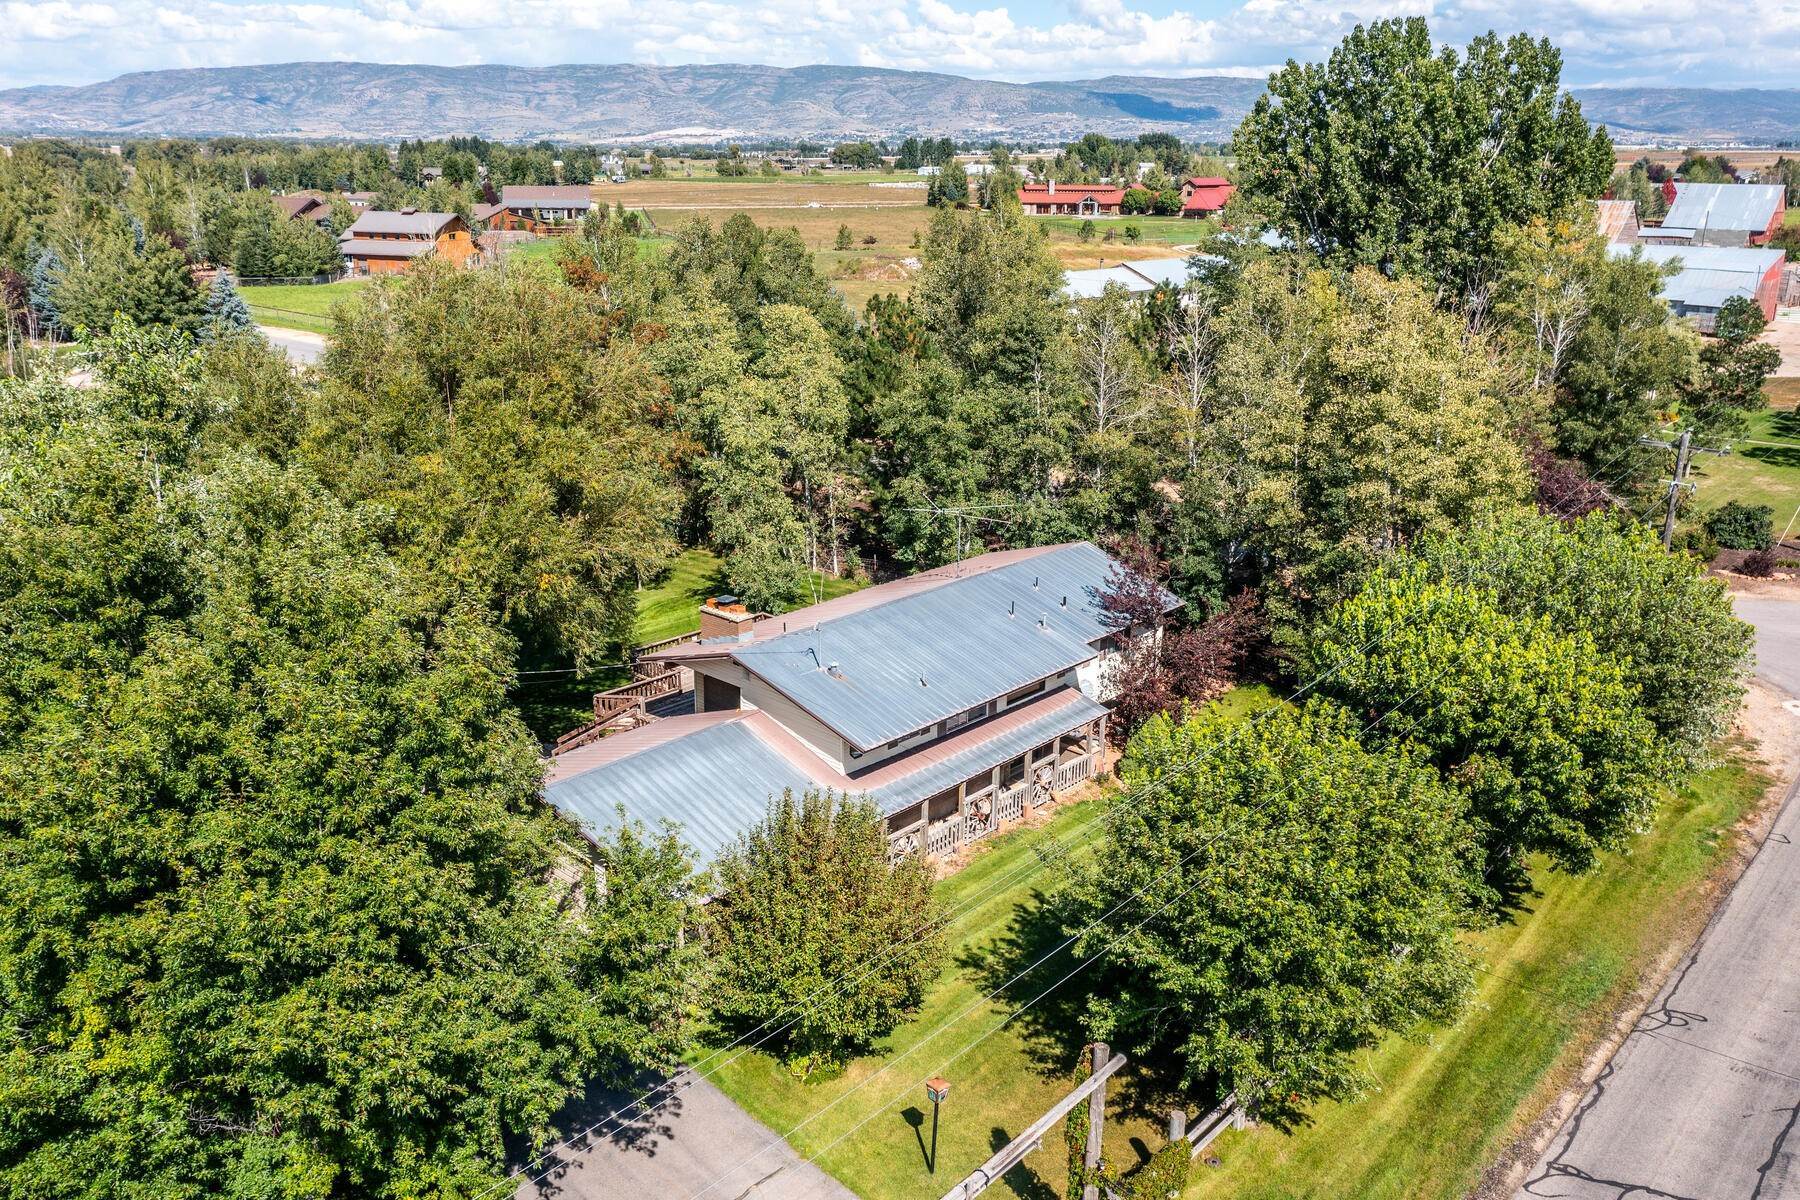 25. Farm and Ranch Properties for Sale at 3 Acres, Winterton barn, Subdividable, Limitless Potential! 3040 West 2400 South Heber City, Utah 84032 United States